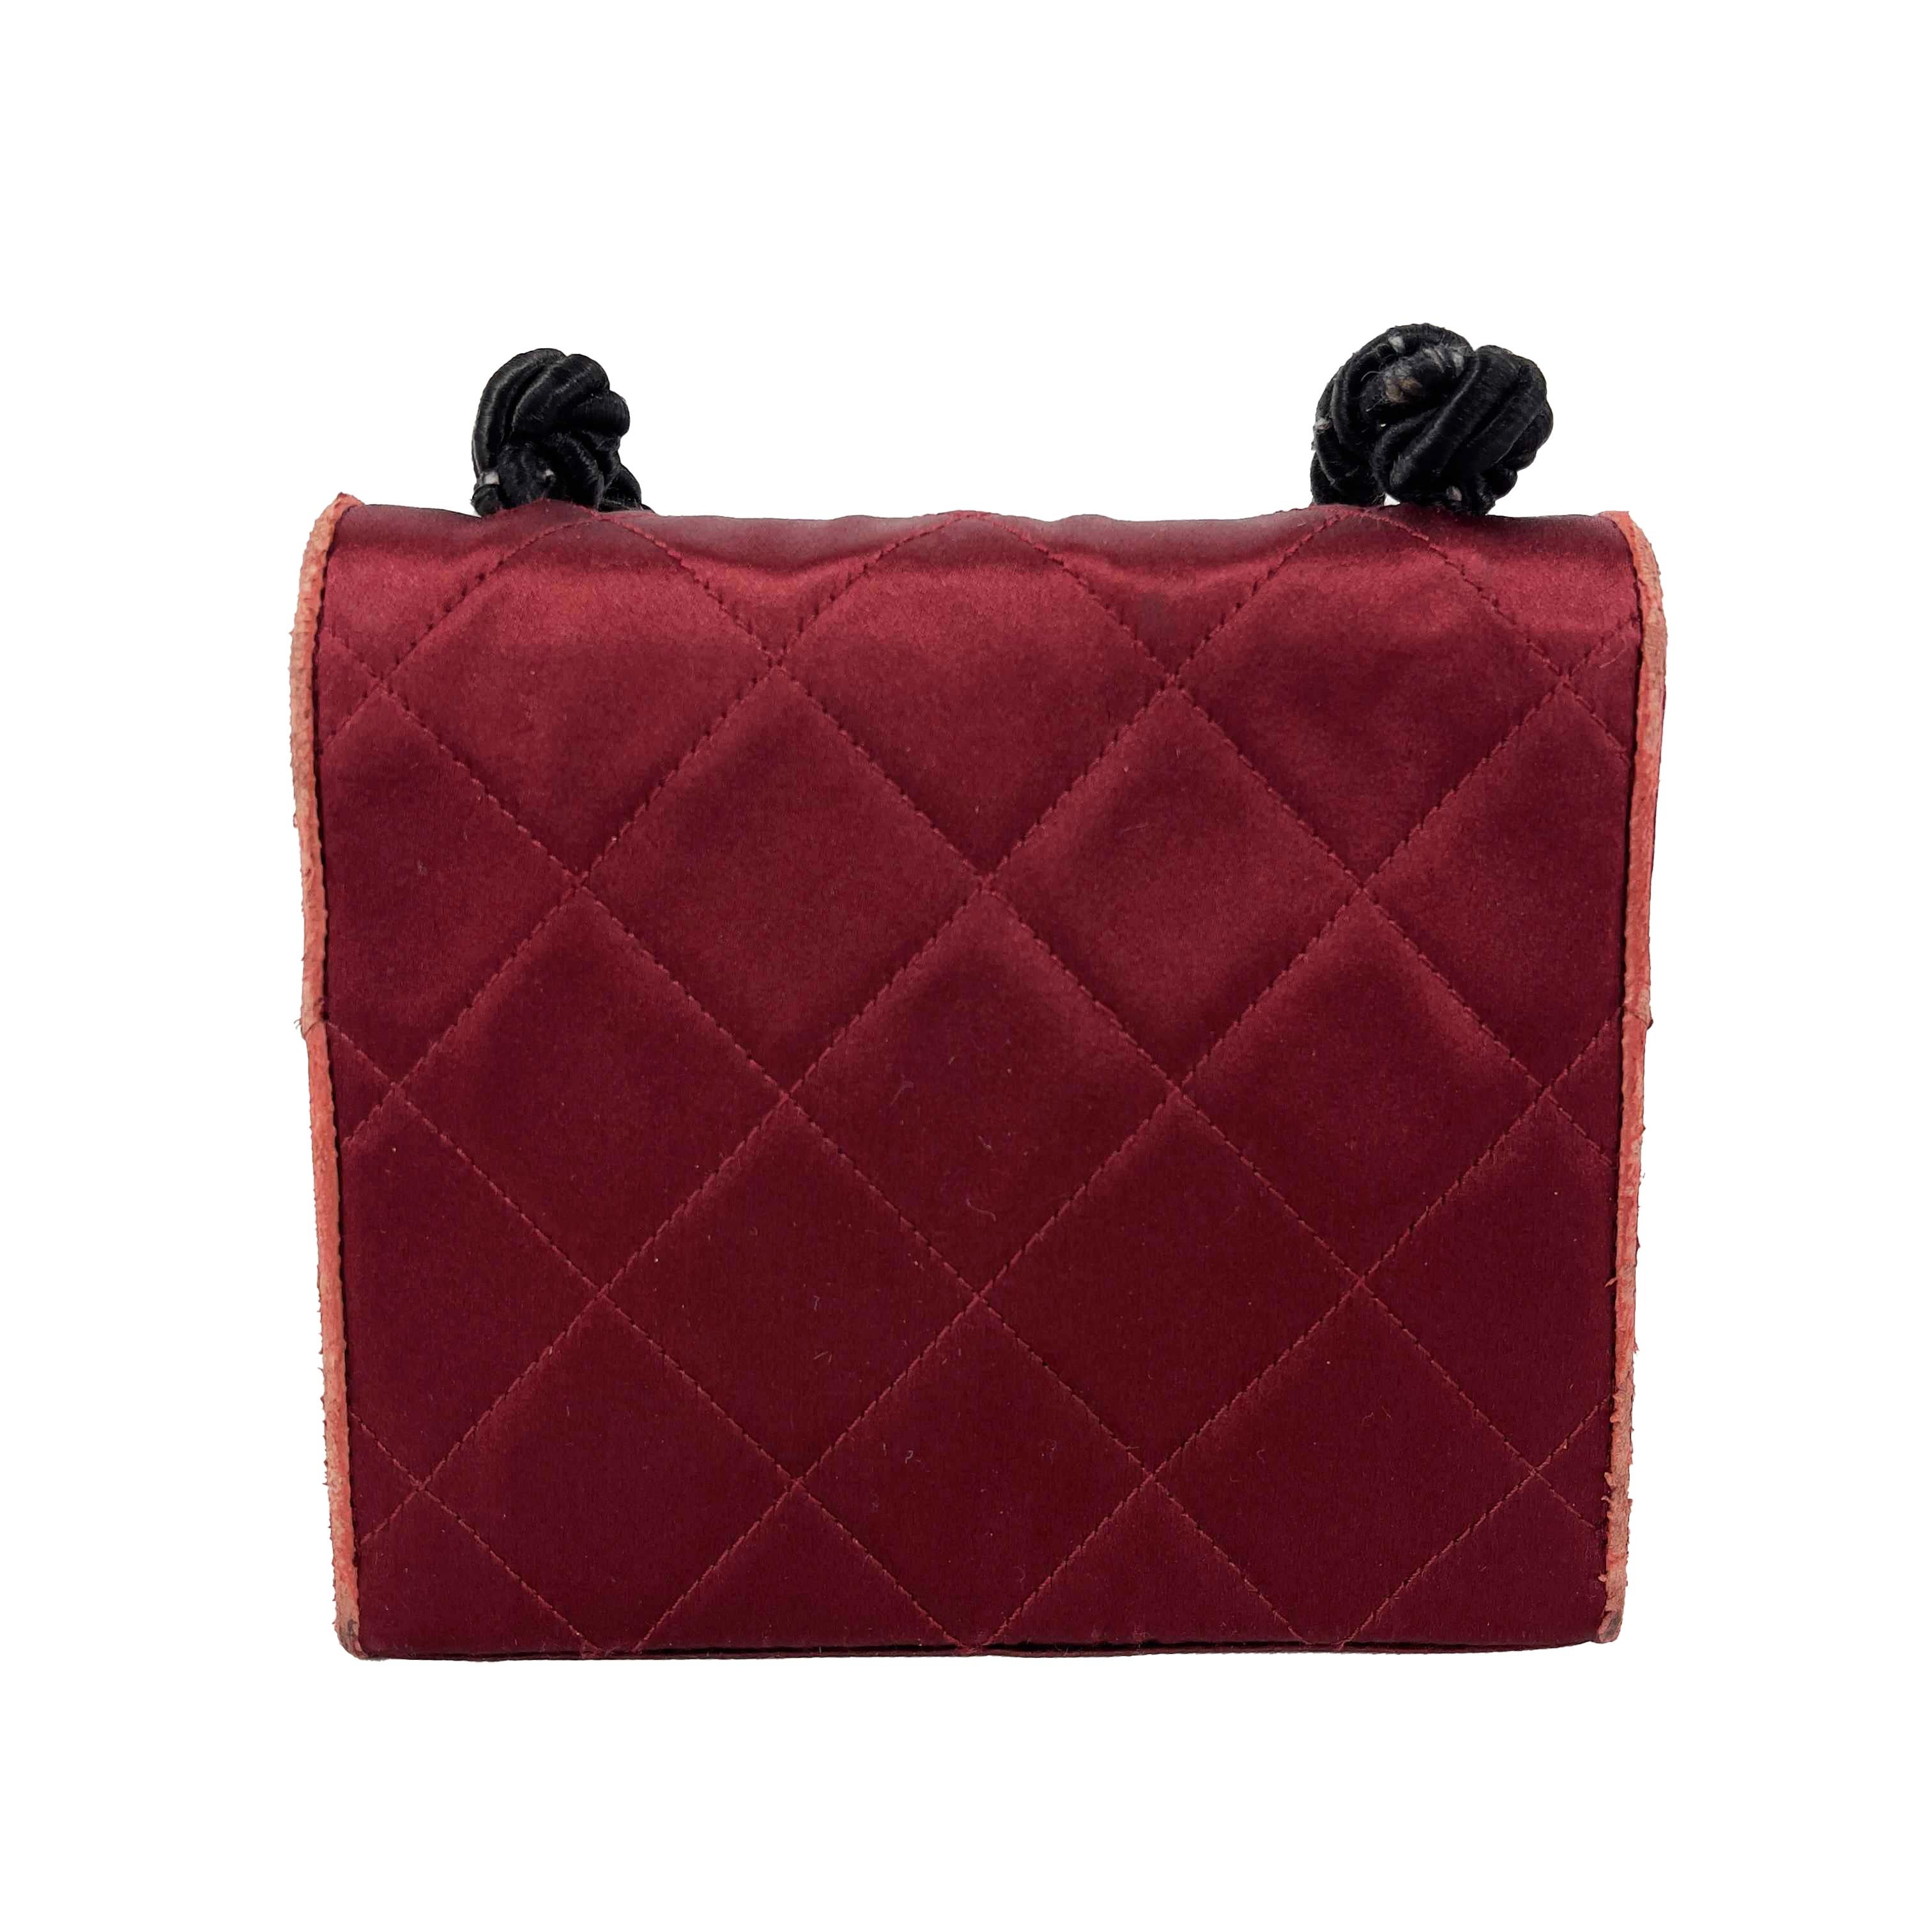 CHANEL - Vintage Satin Quilted Rope Shoulder Crossbody - Burgundy / Black

Description

This mini shoulder bag can be worn as a crossbody and is crafted in a diamond quilted burgundy red satin.
Black braided rope strap.
Gold leather interior.
One